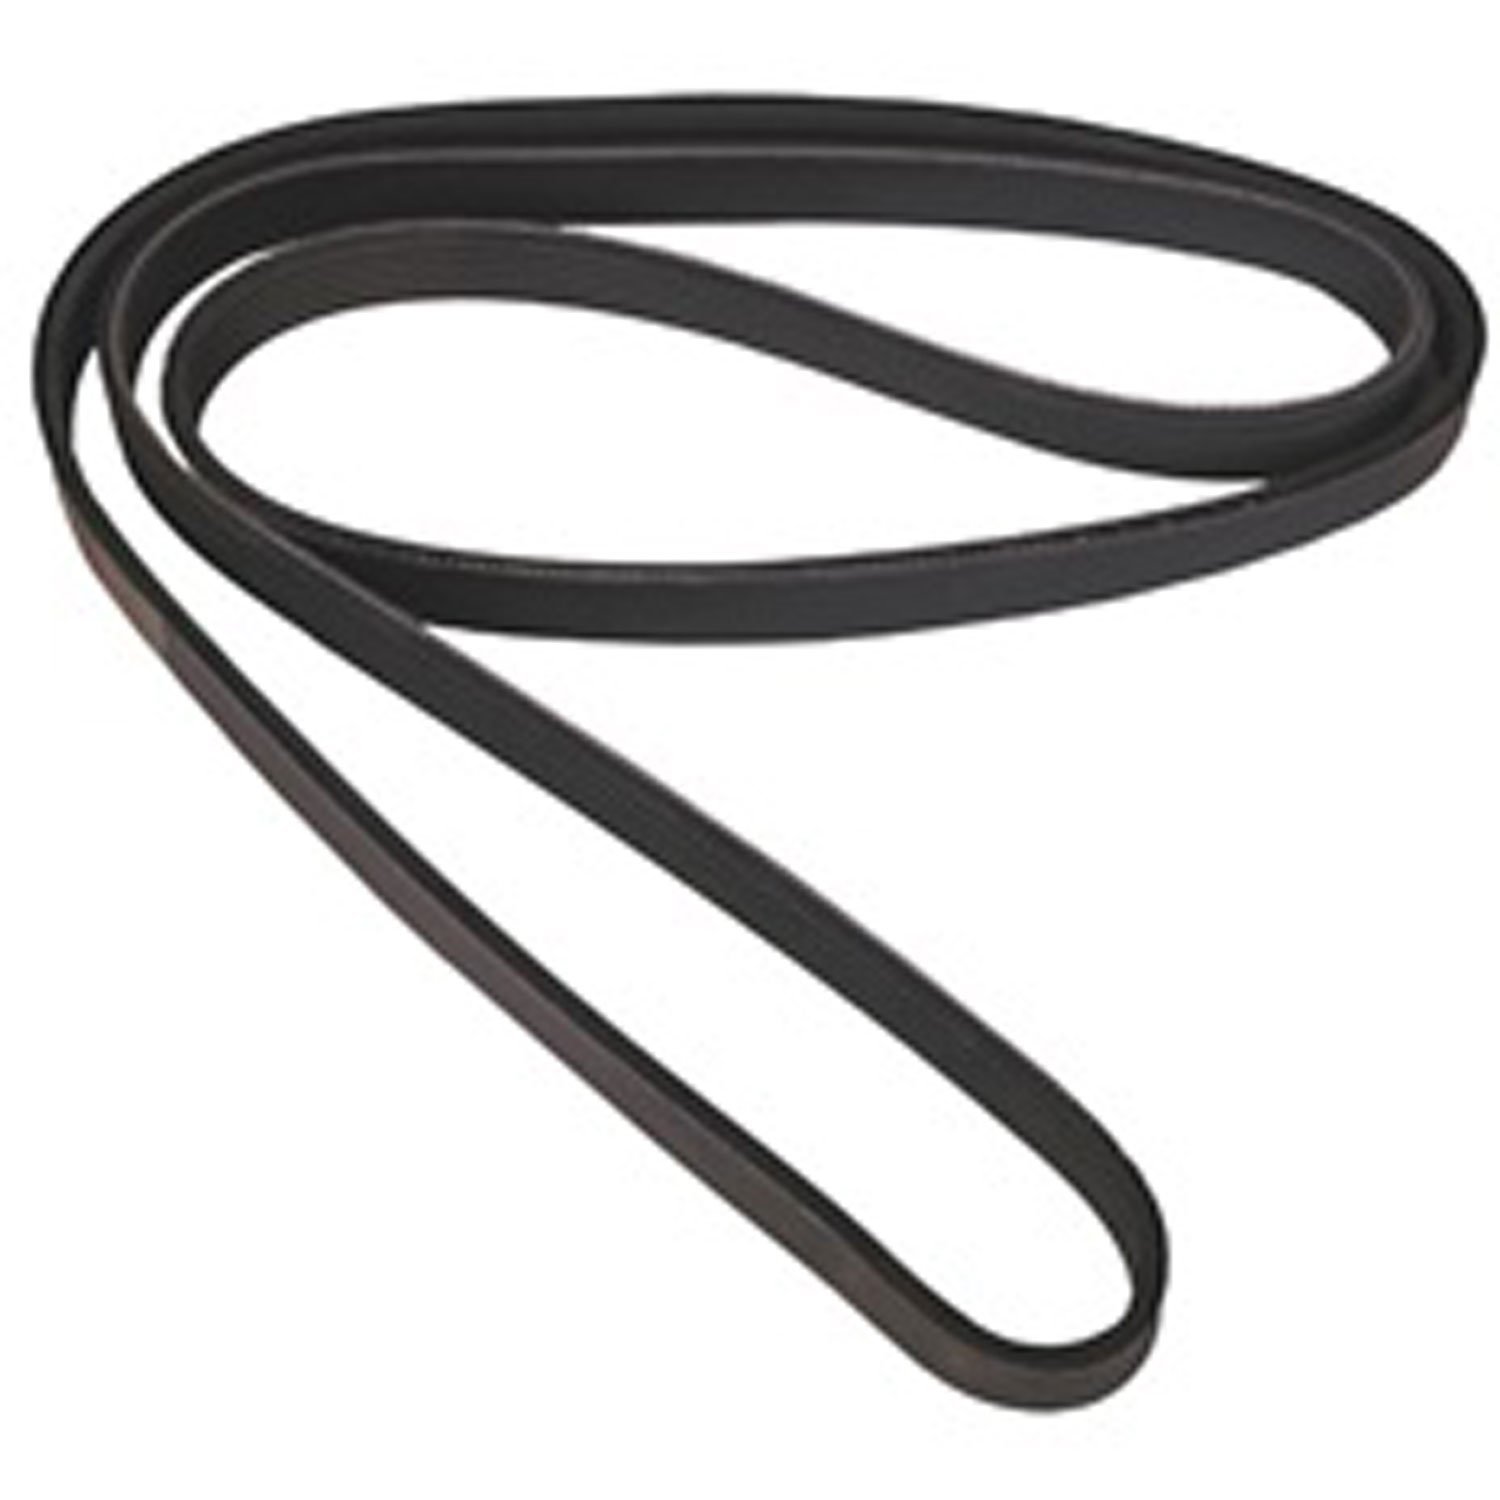 Serpentine Belt for 1987-1990 Jeep YJ Wrangler with